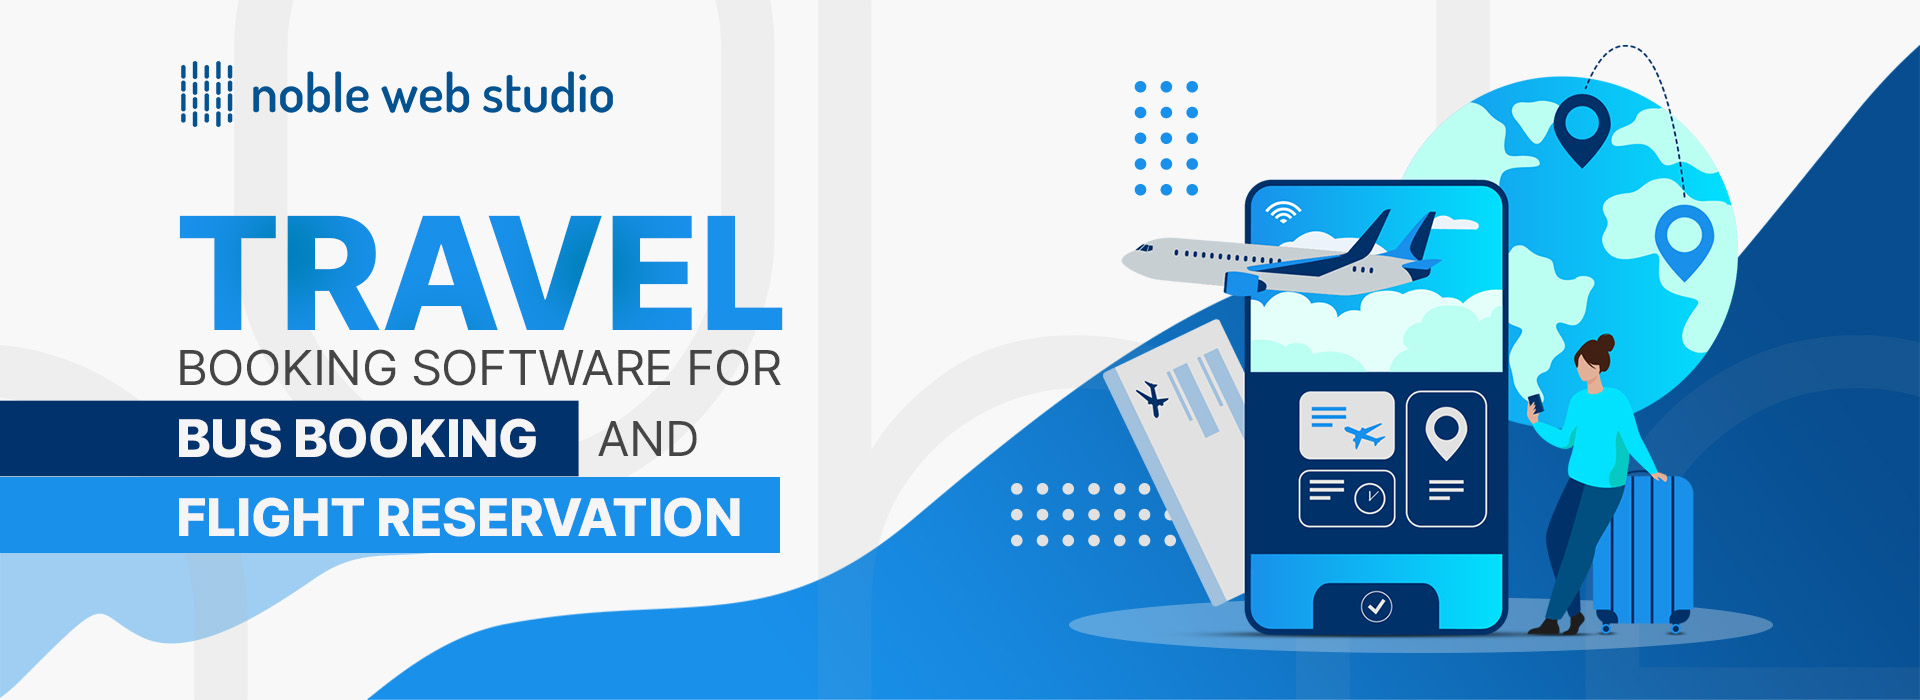 Travel Booking Software for Bus Booking & Flight Reservation